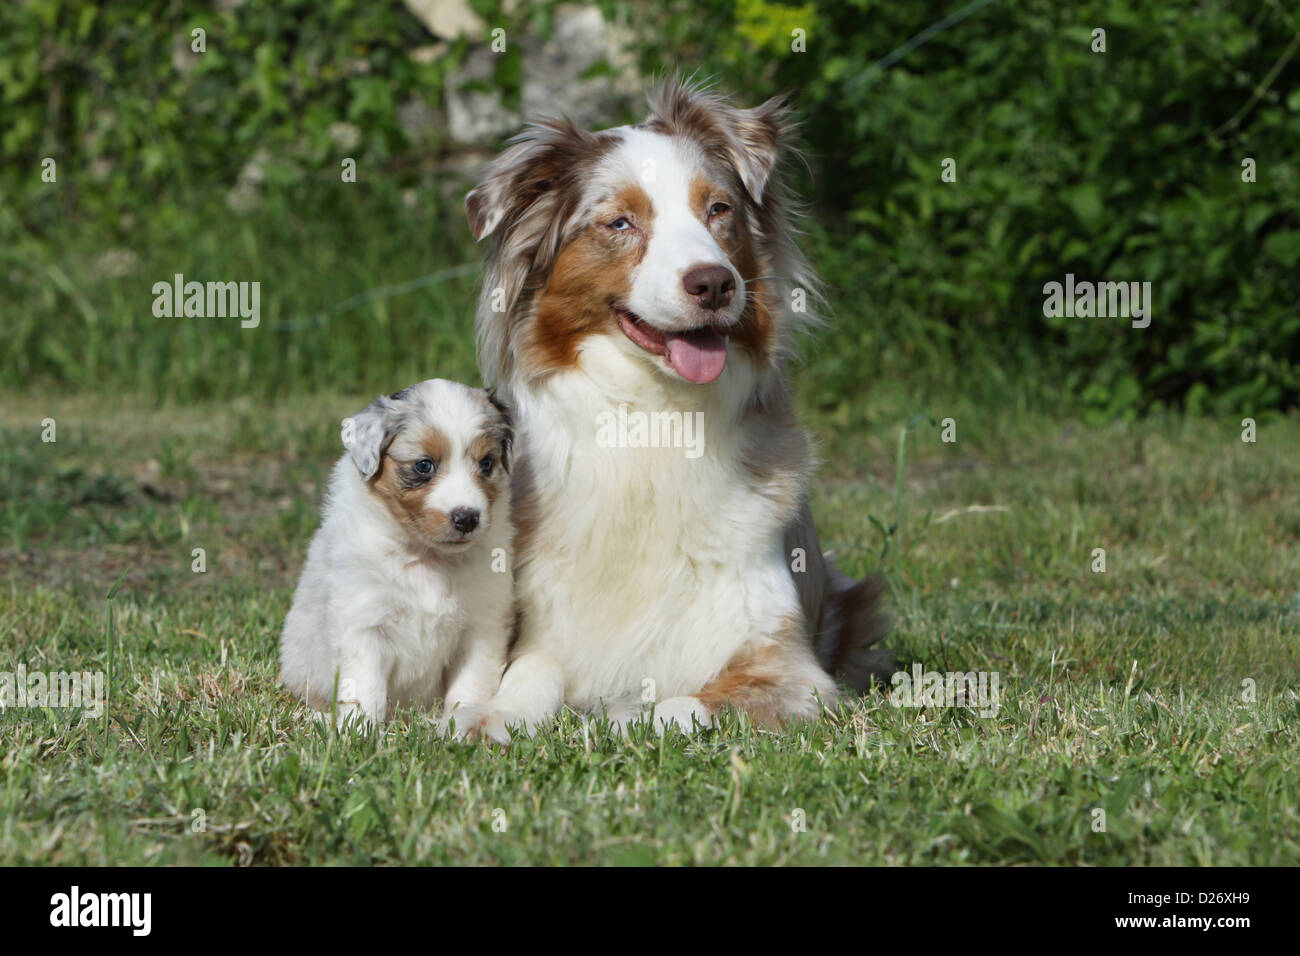 Dog Australian shepherd / Aussie adult and puppy in the grass Stock Photo -  Alamy